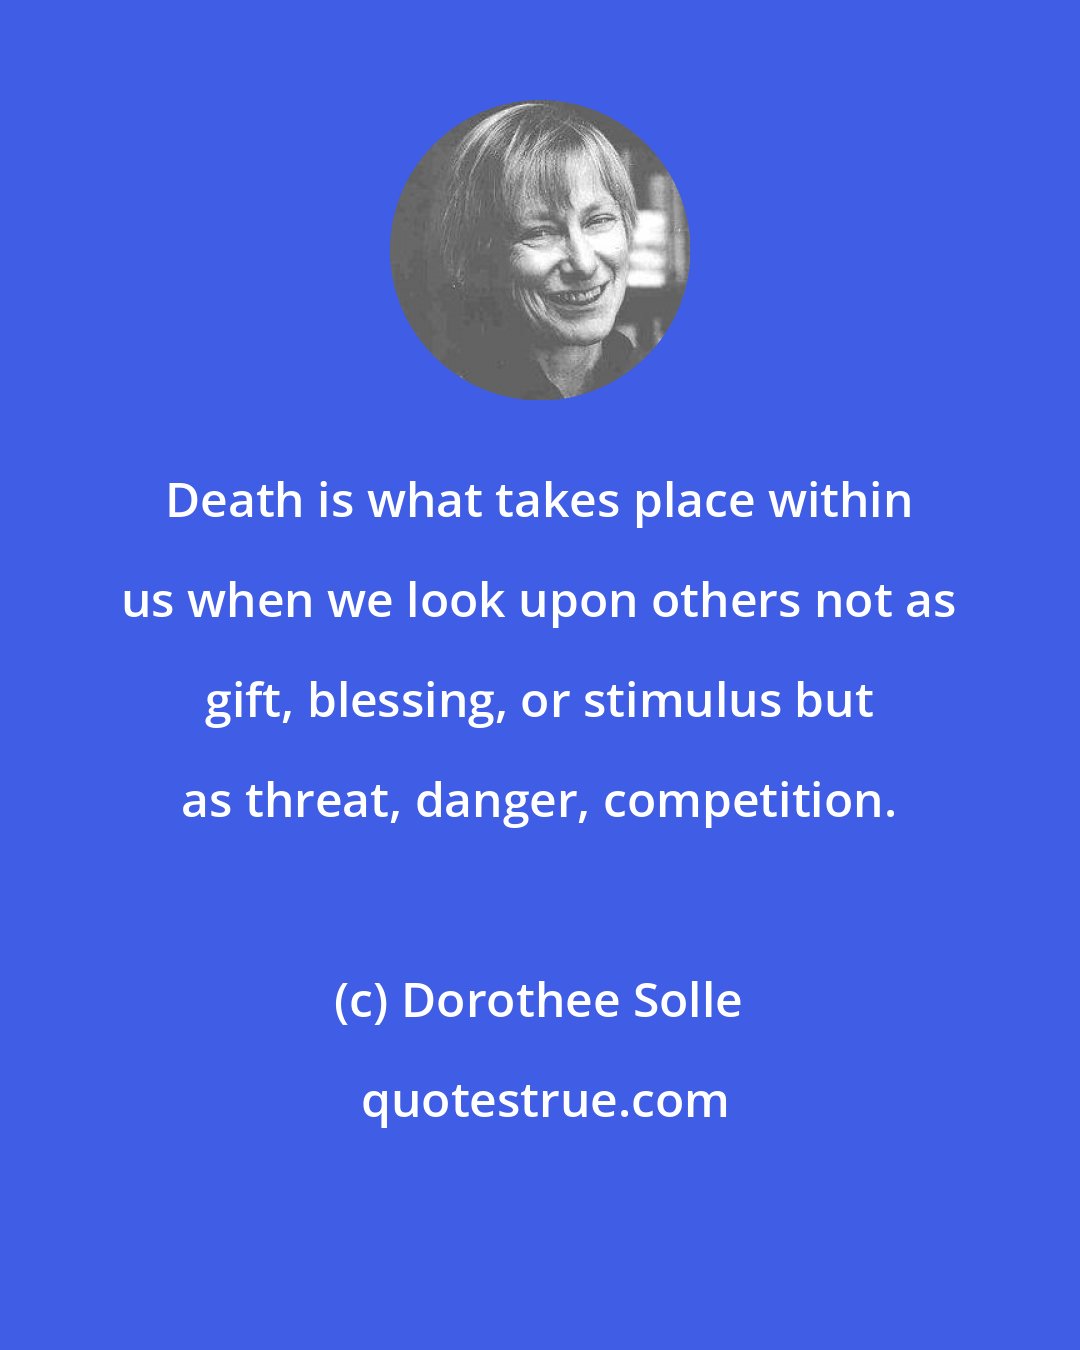 Dorothee Solle: Death is what takes place within us when we look upon others not as gift, blessing, or stimulus but as threat, danger, competition.